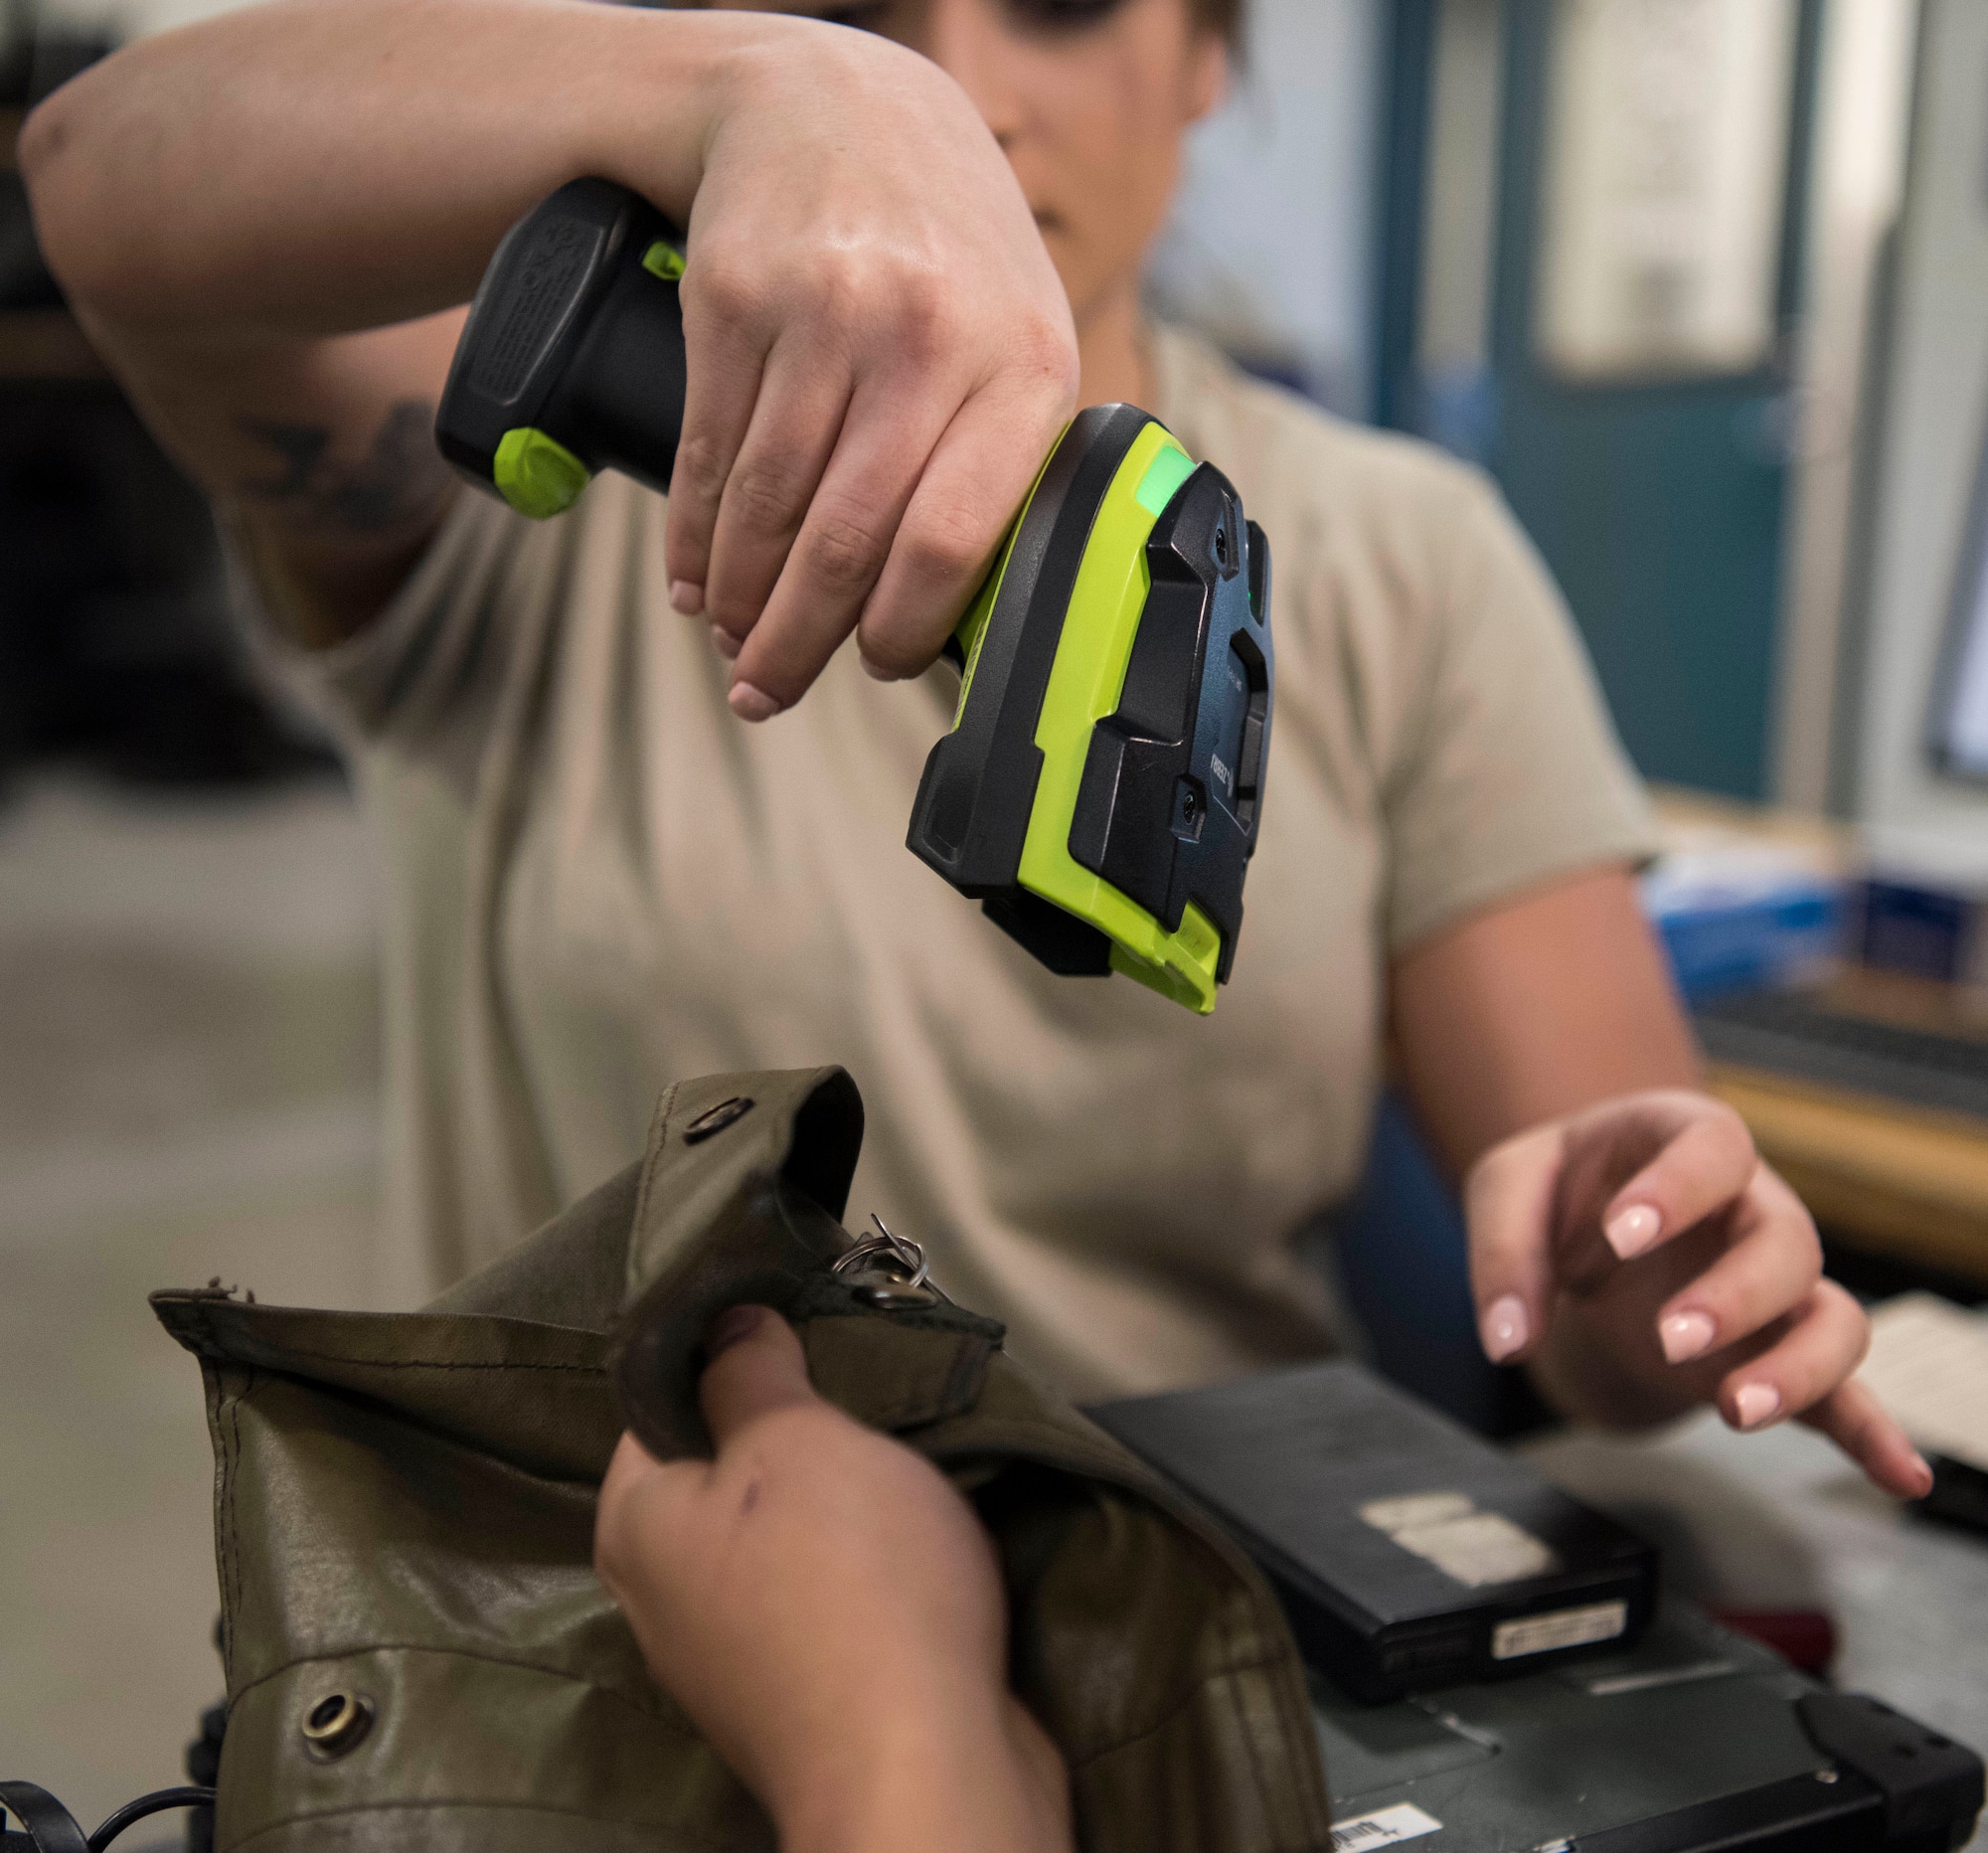 Senior Airman Isabella Ospina, a 525th Aircraft Maintenance Unit F-22 Raptor crew chief support technician, scans tools being checked out during a tool and equipment shift change at Joint Base Elmendorf-Richardson, Alaska, July 19, 2018. Ospina is responsible for the issue and control of more than 10,000 tools during one of three shift inventories.